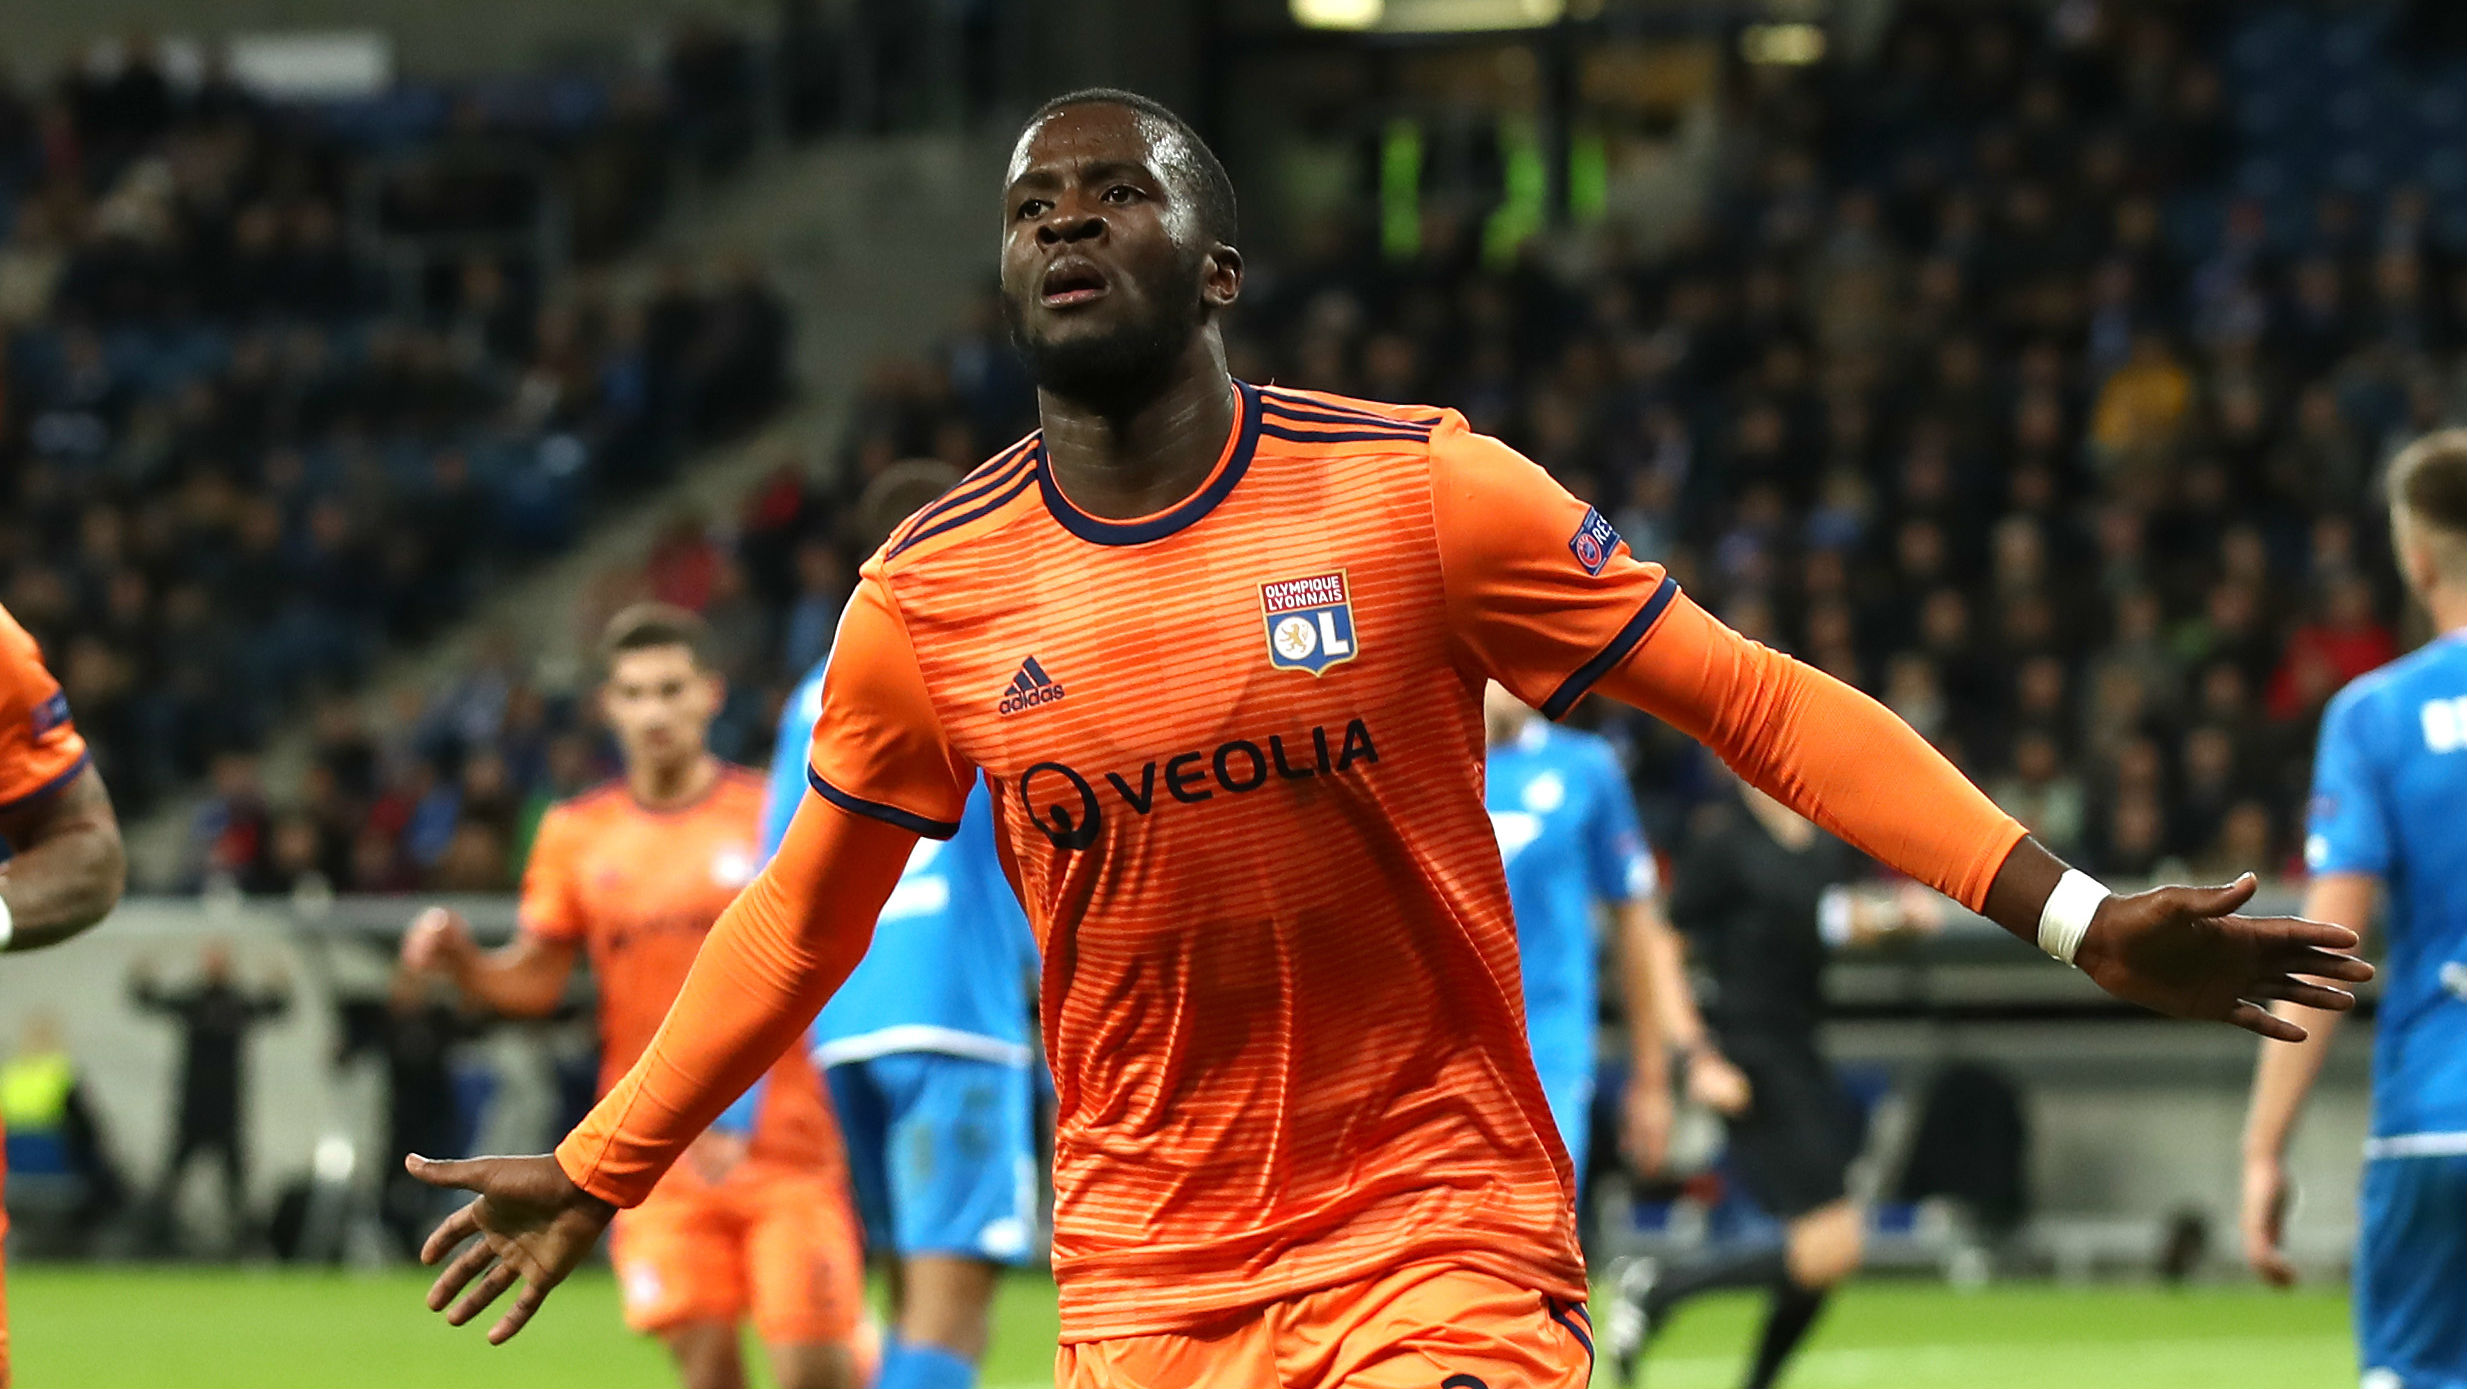 Lyon midfielder Tanguy Ndombele is close to completing a transfer to Tottenham Hotspur